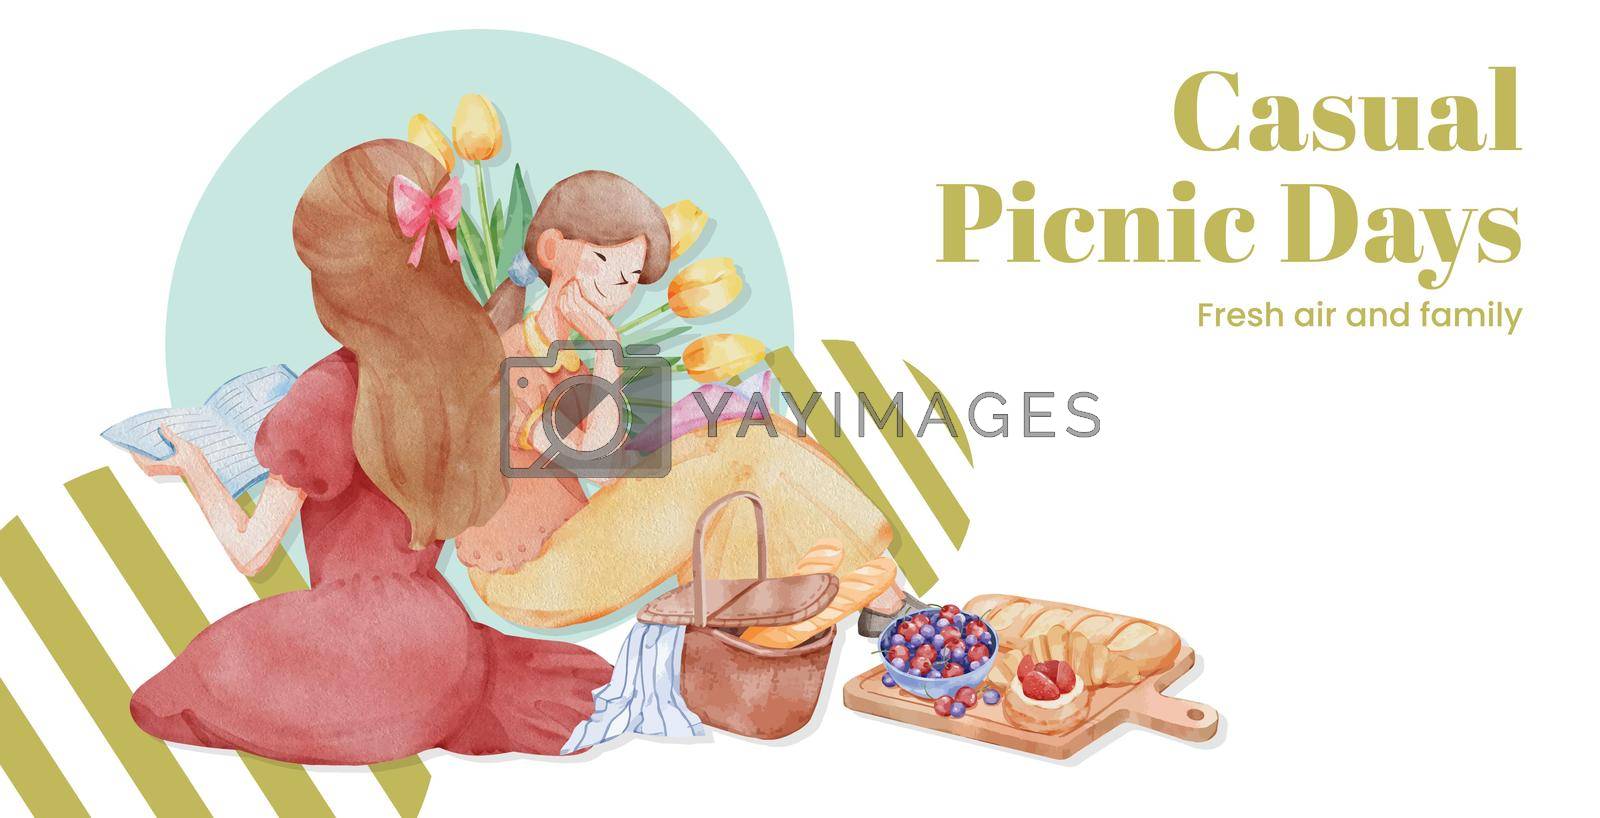 Royalty free image of Billboard template with picnic day concept,watercolor style by Photographeeasia